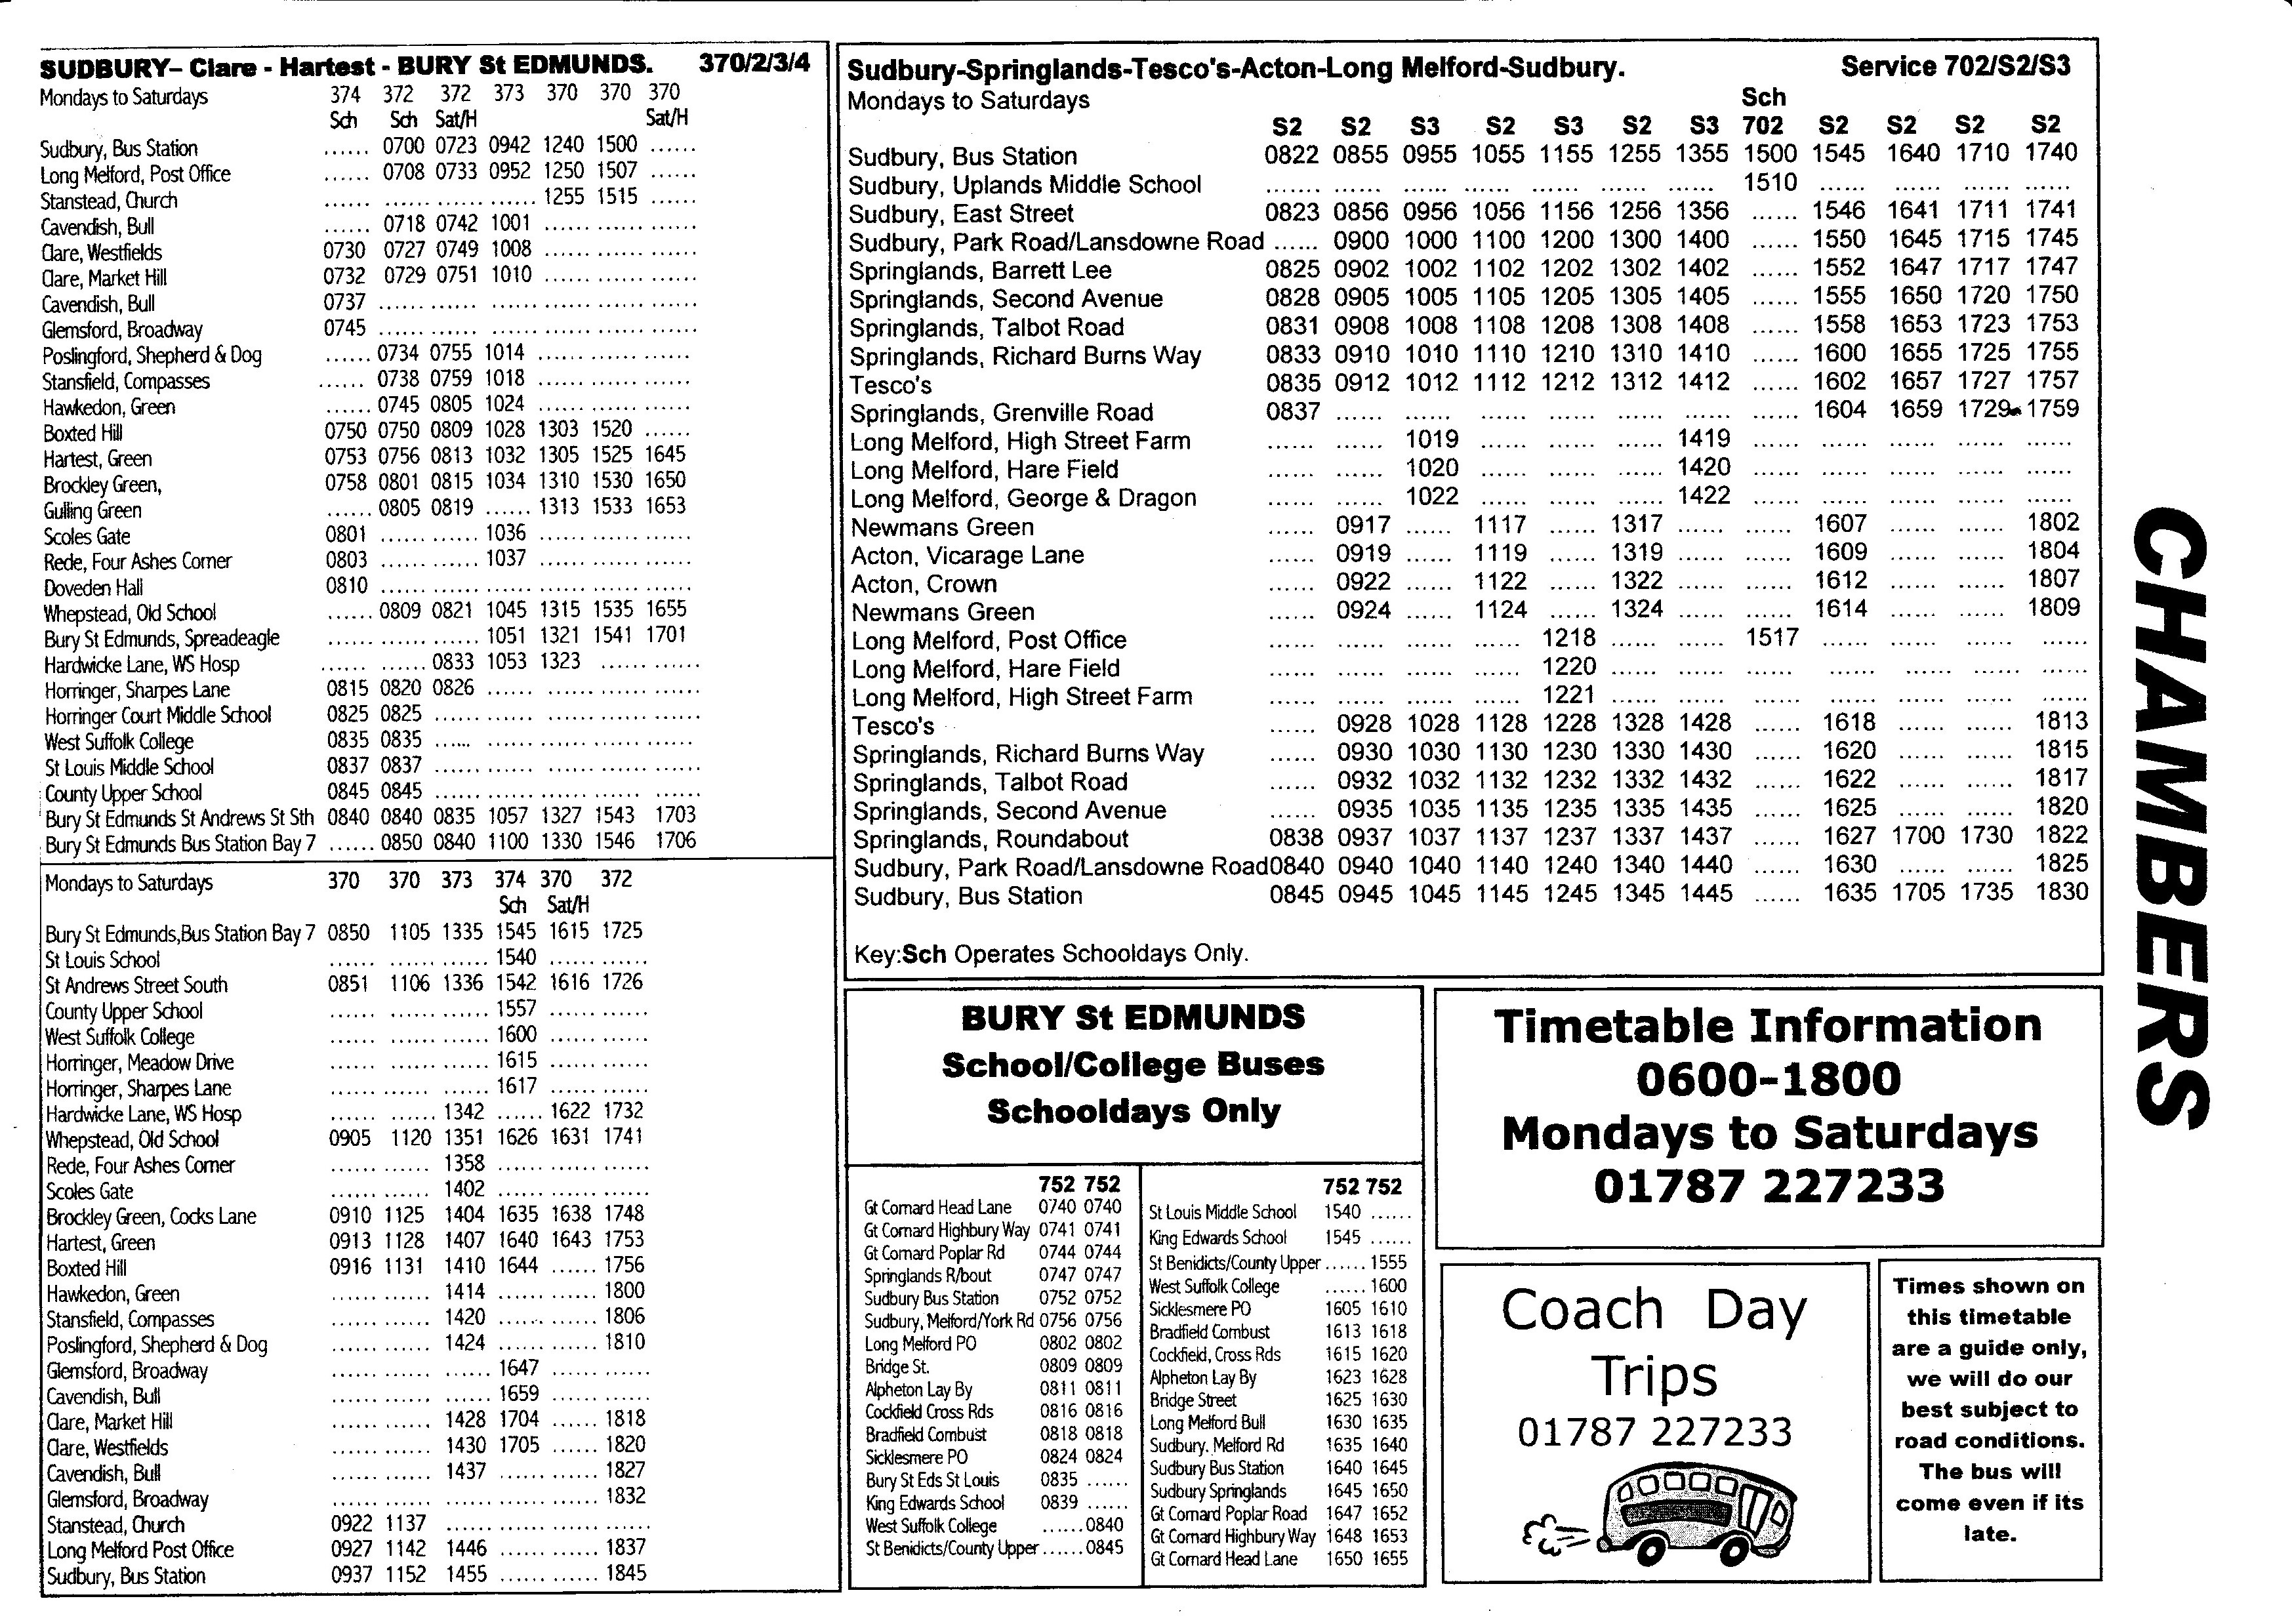 2005 timetable page two